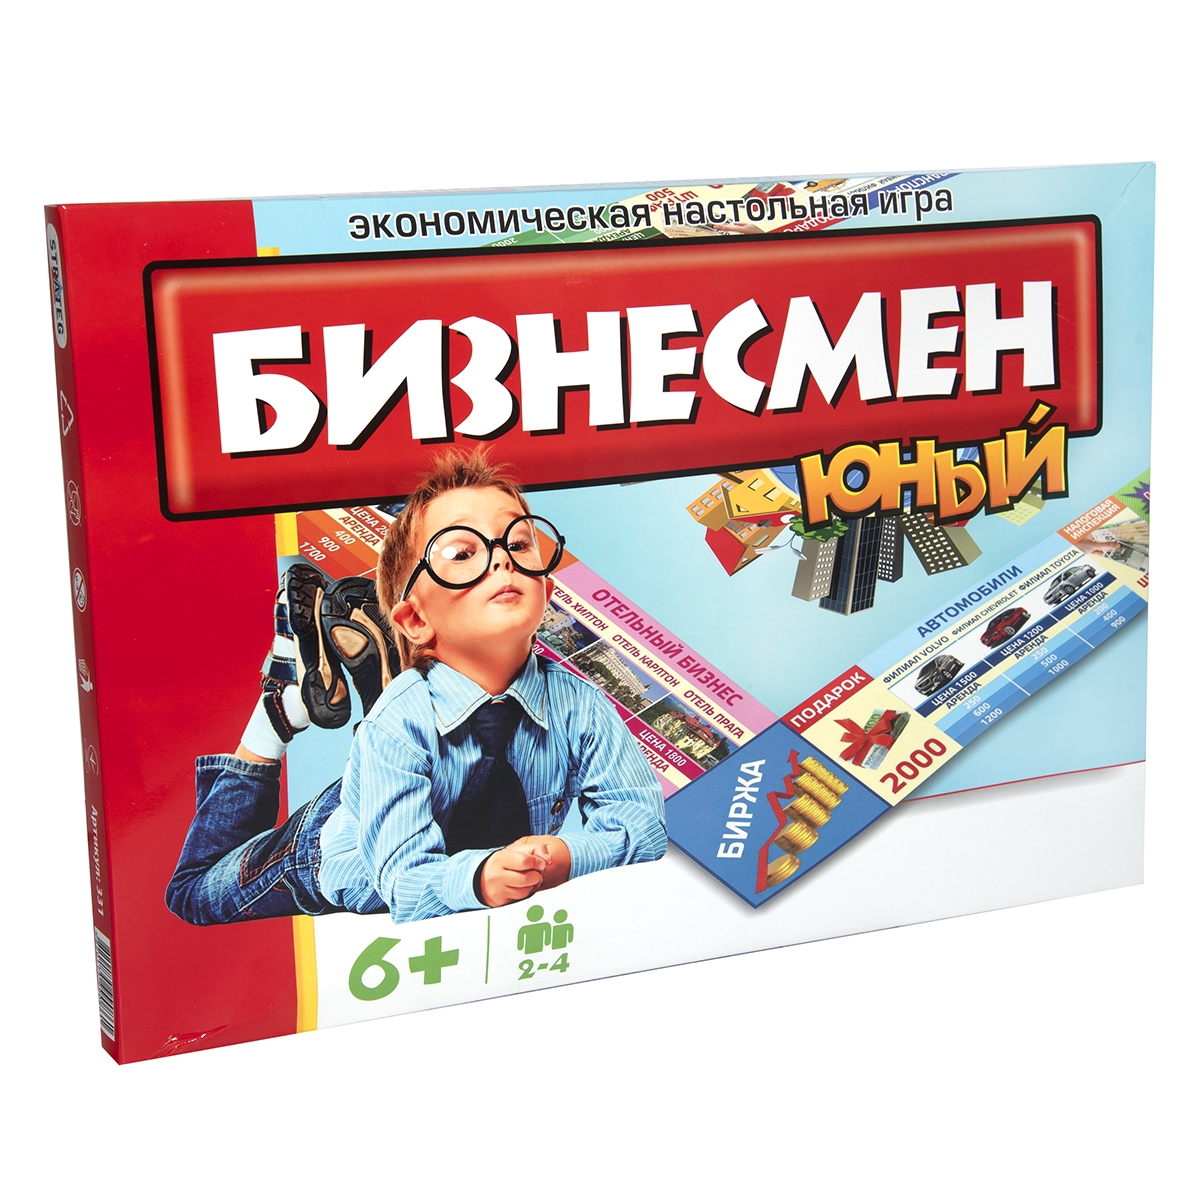 Game "Young businessman" (Russian) (331)